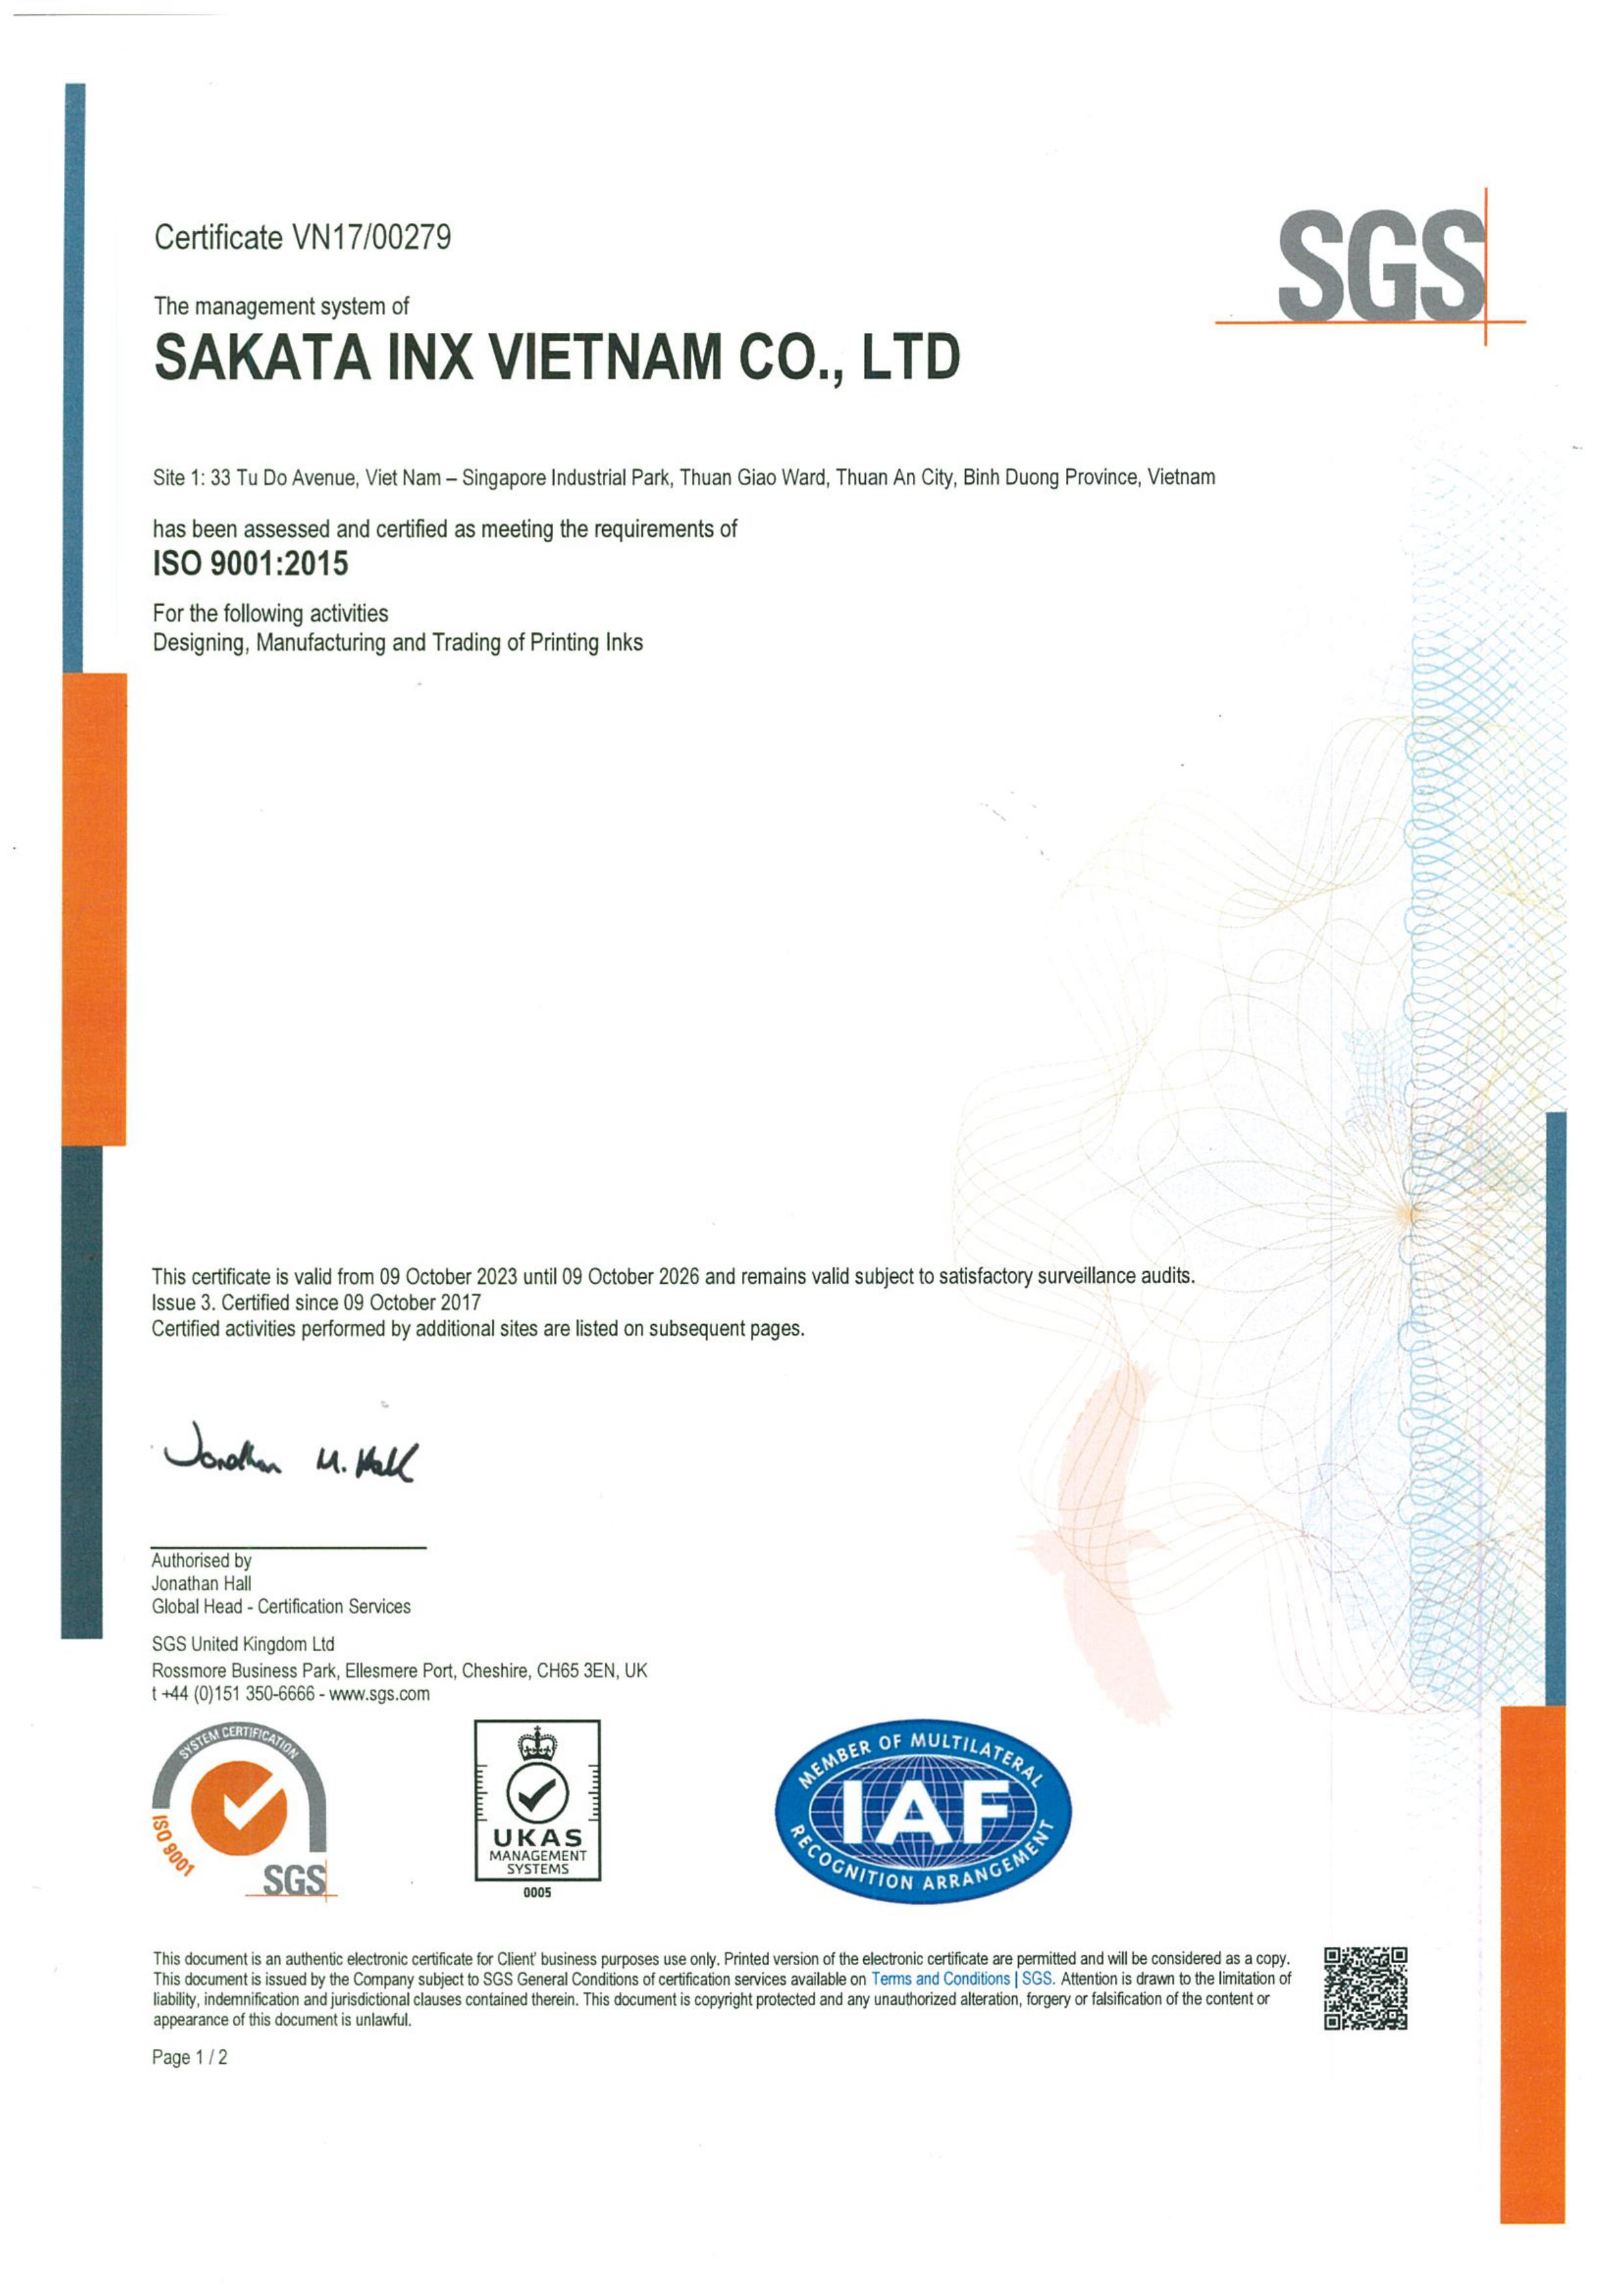 ISO 9001:2015 Certification in Quality Management System standards.